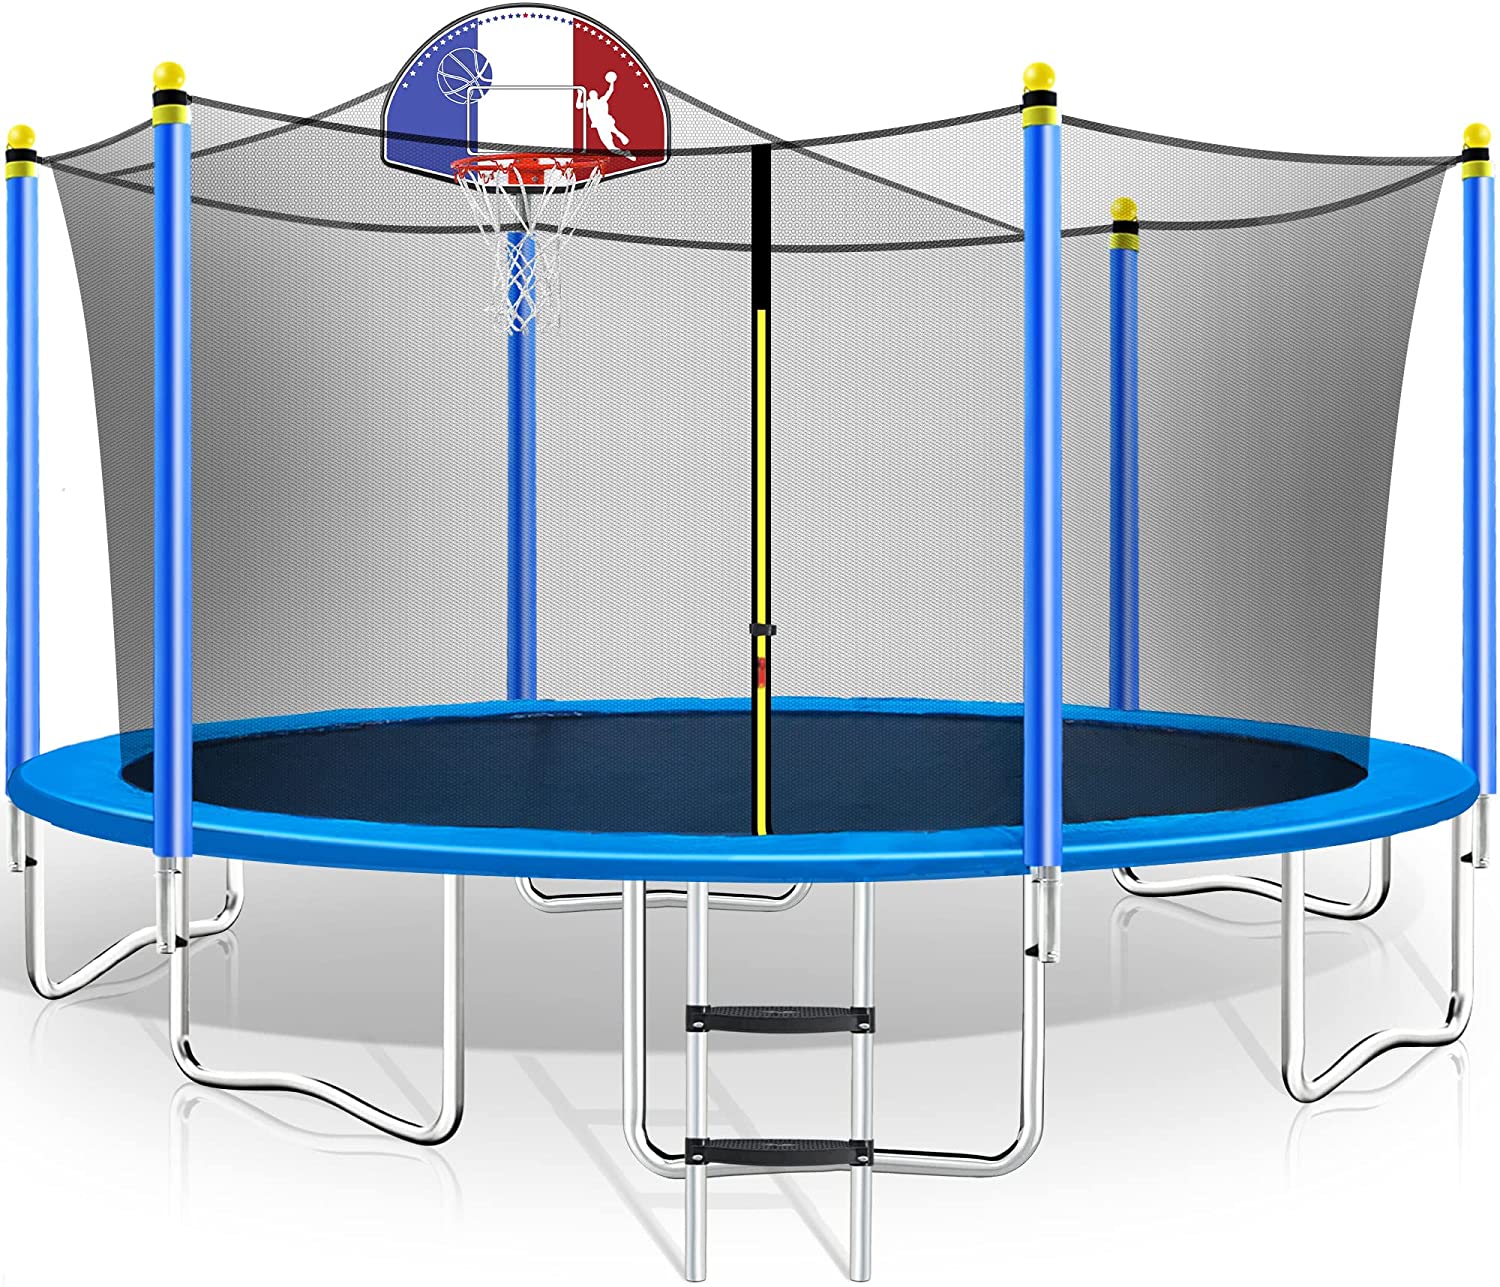 Merax 15 FT Trampoline with Safety Enclosure Net